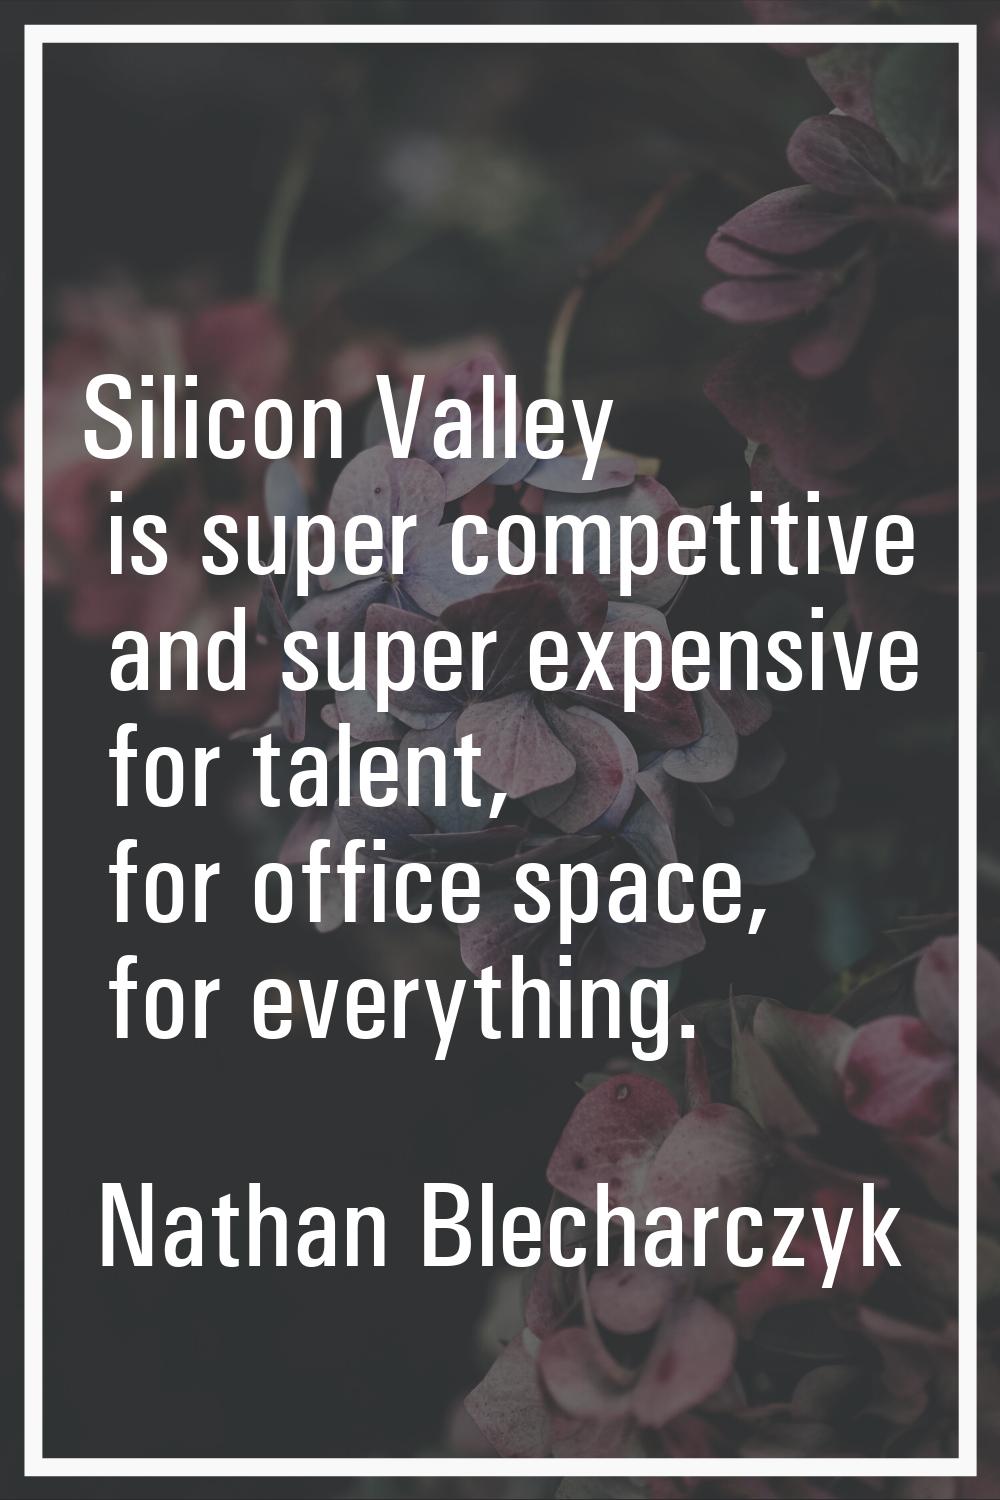 Silicon Valley is super competitive and super expensive for talent, for office space, for everythin